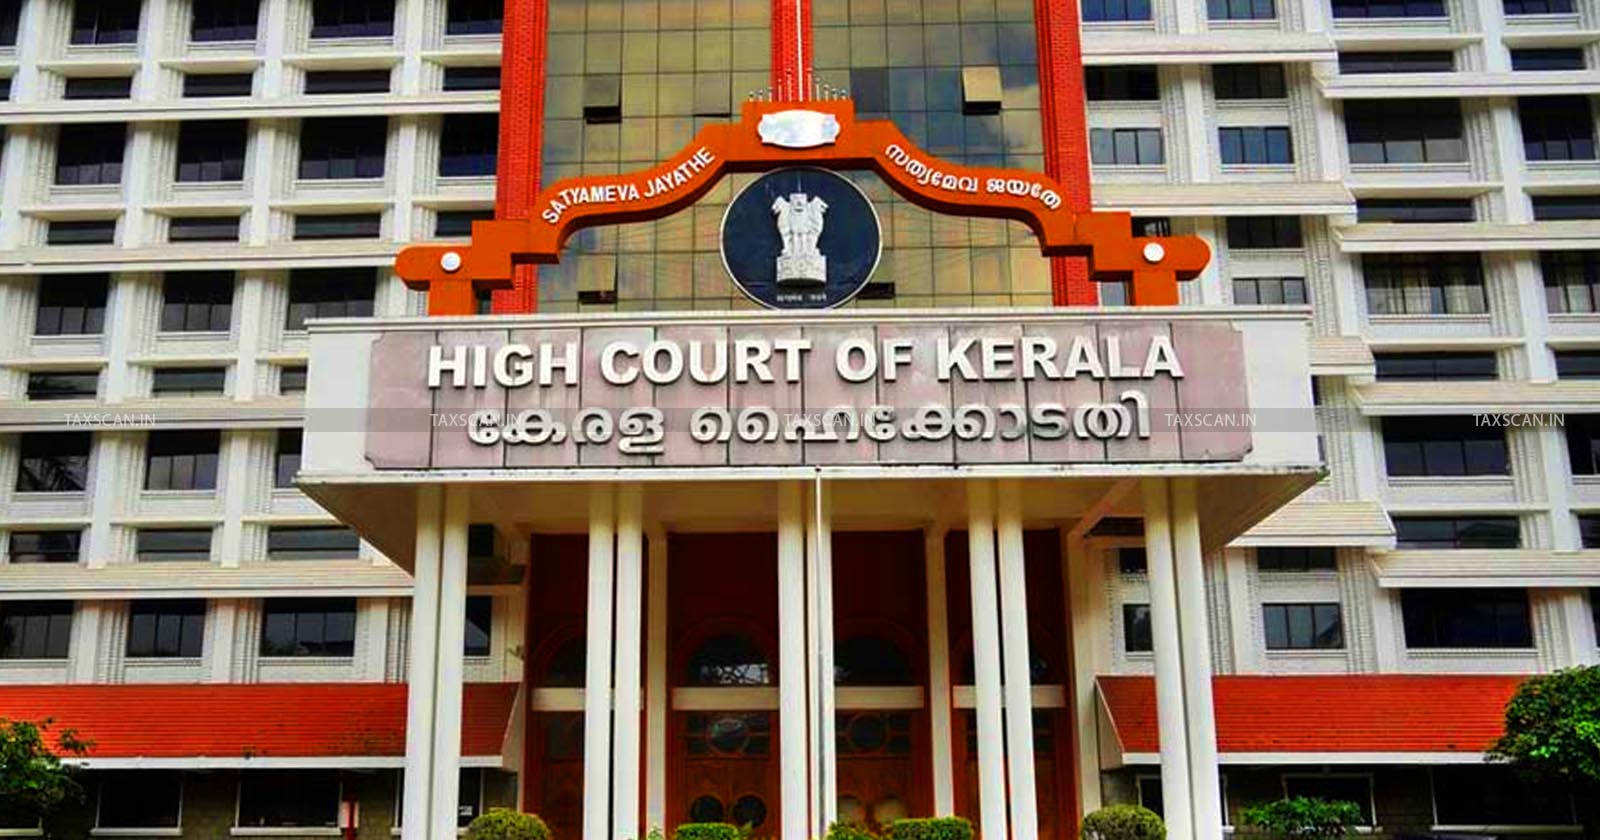 Exporter - Kerala HC - Kerala High Court - igst - Zero Rated Supplies - Recovery of Refunded IGST - TAXSCAN